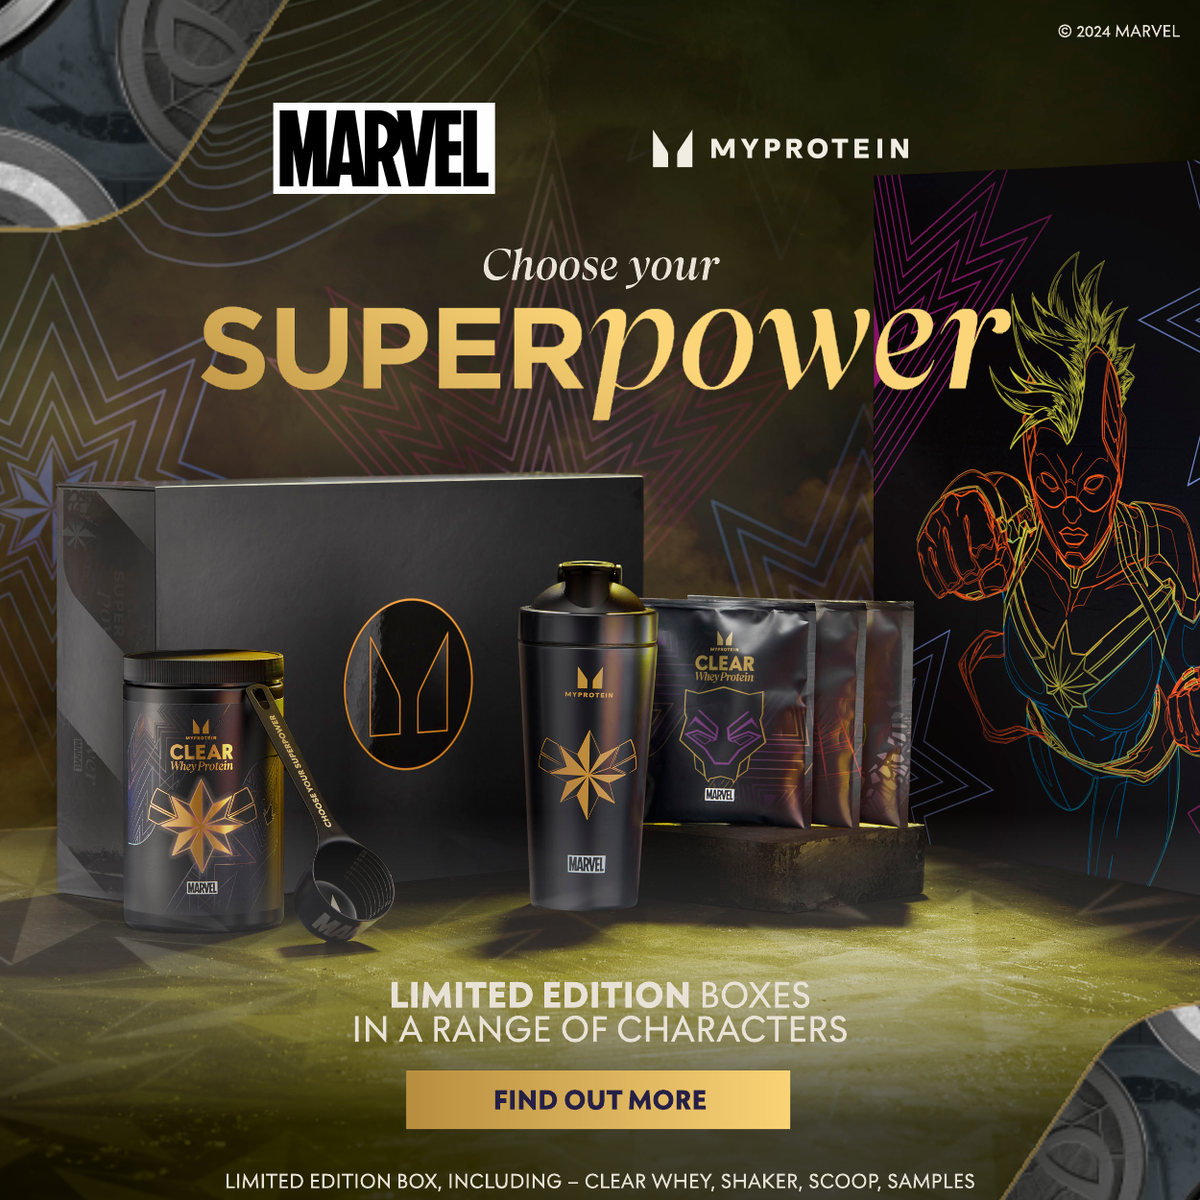 Marvel x Myprotein. Choose your superpower. Limited edition boxes. Find out more.